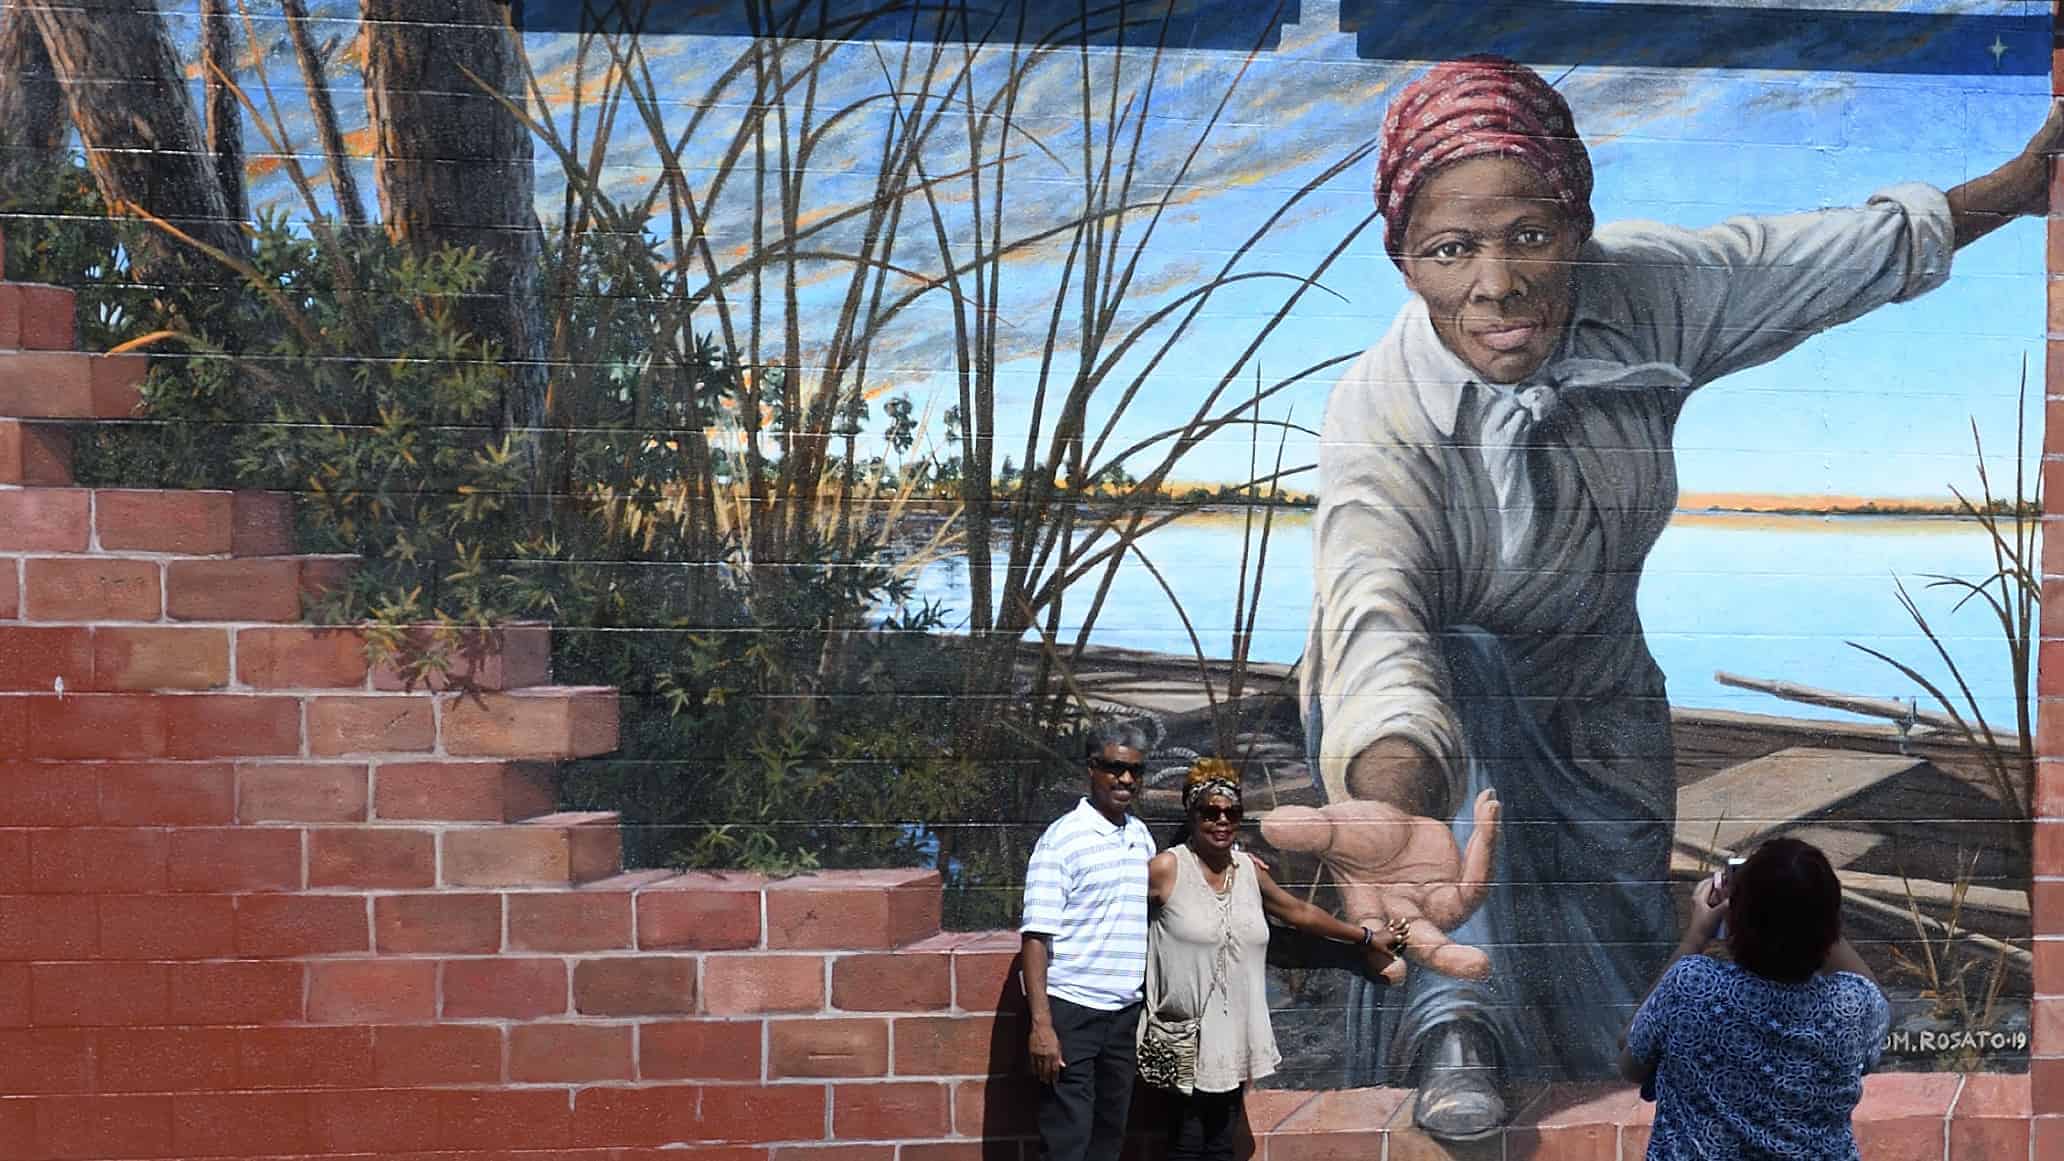 Harriet Tubman holds out a hand to Lt. Governor Rutherford, looking at the mural by Anthony DePanise in Mryland.